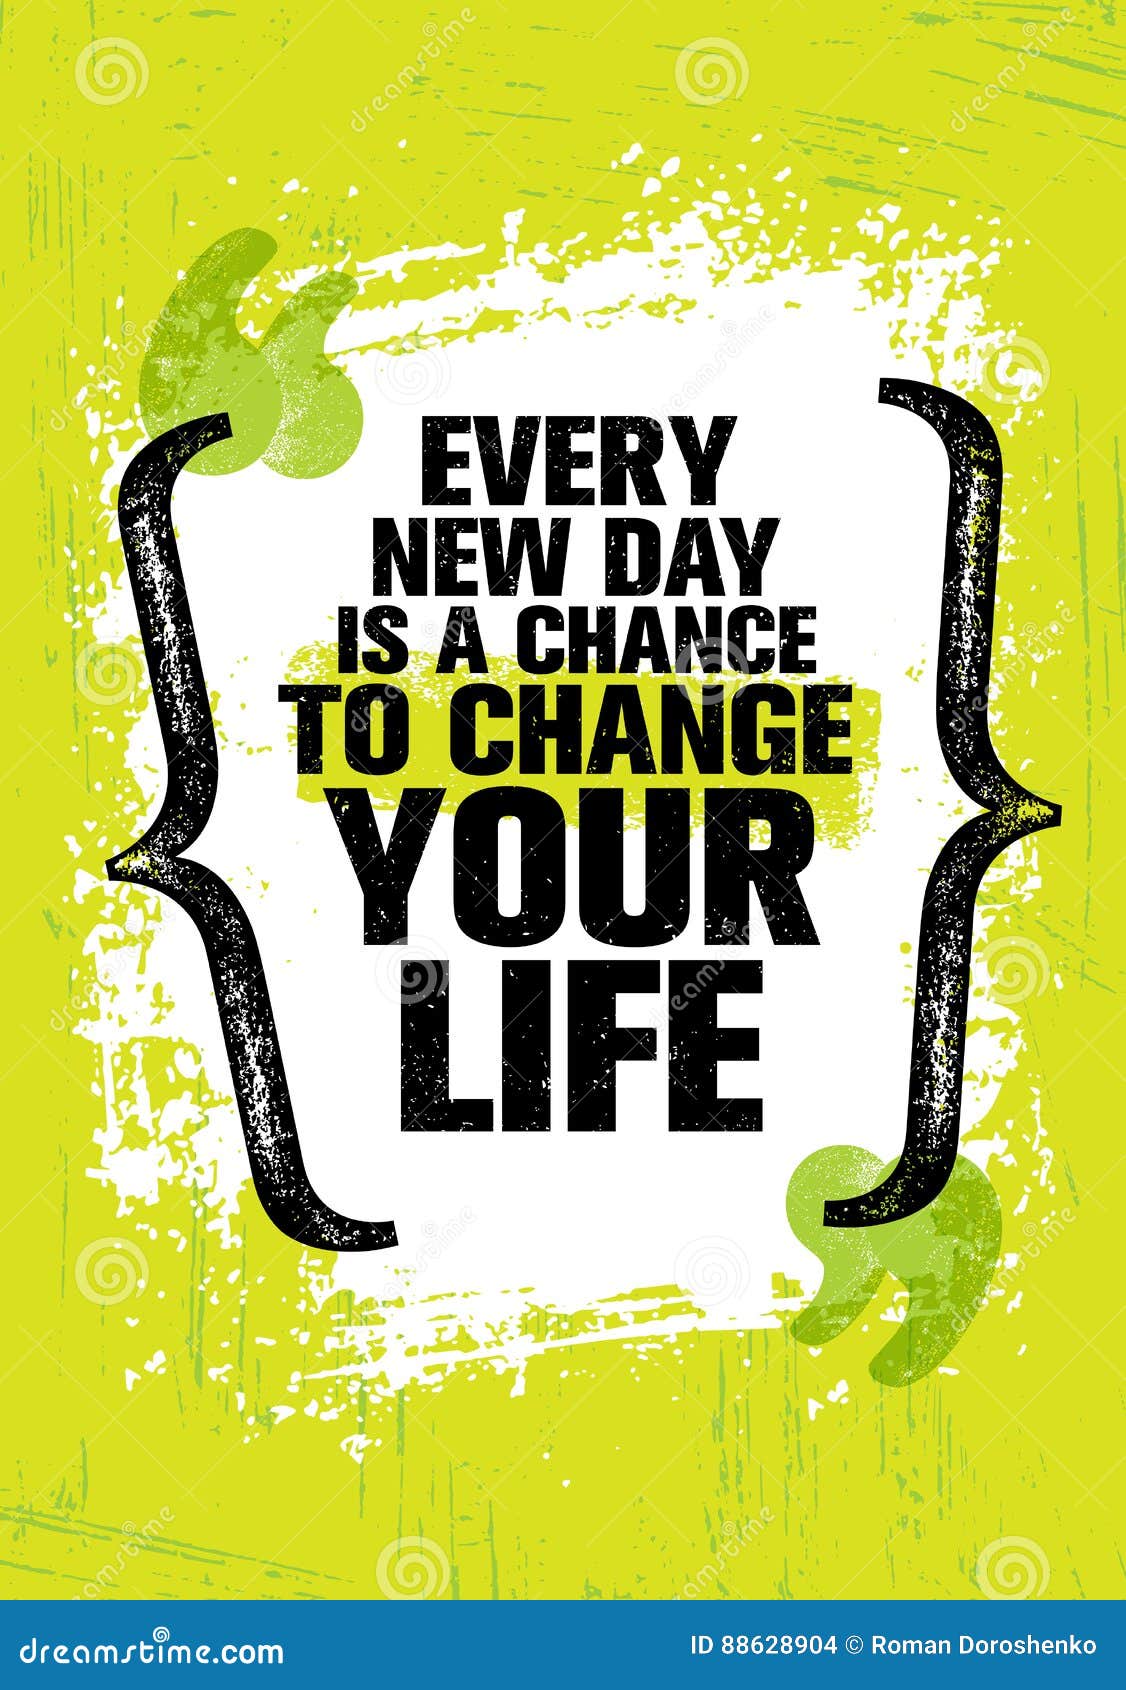 every new day is a chance to change your life. inspiring creative motivation quote template.  typography banner